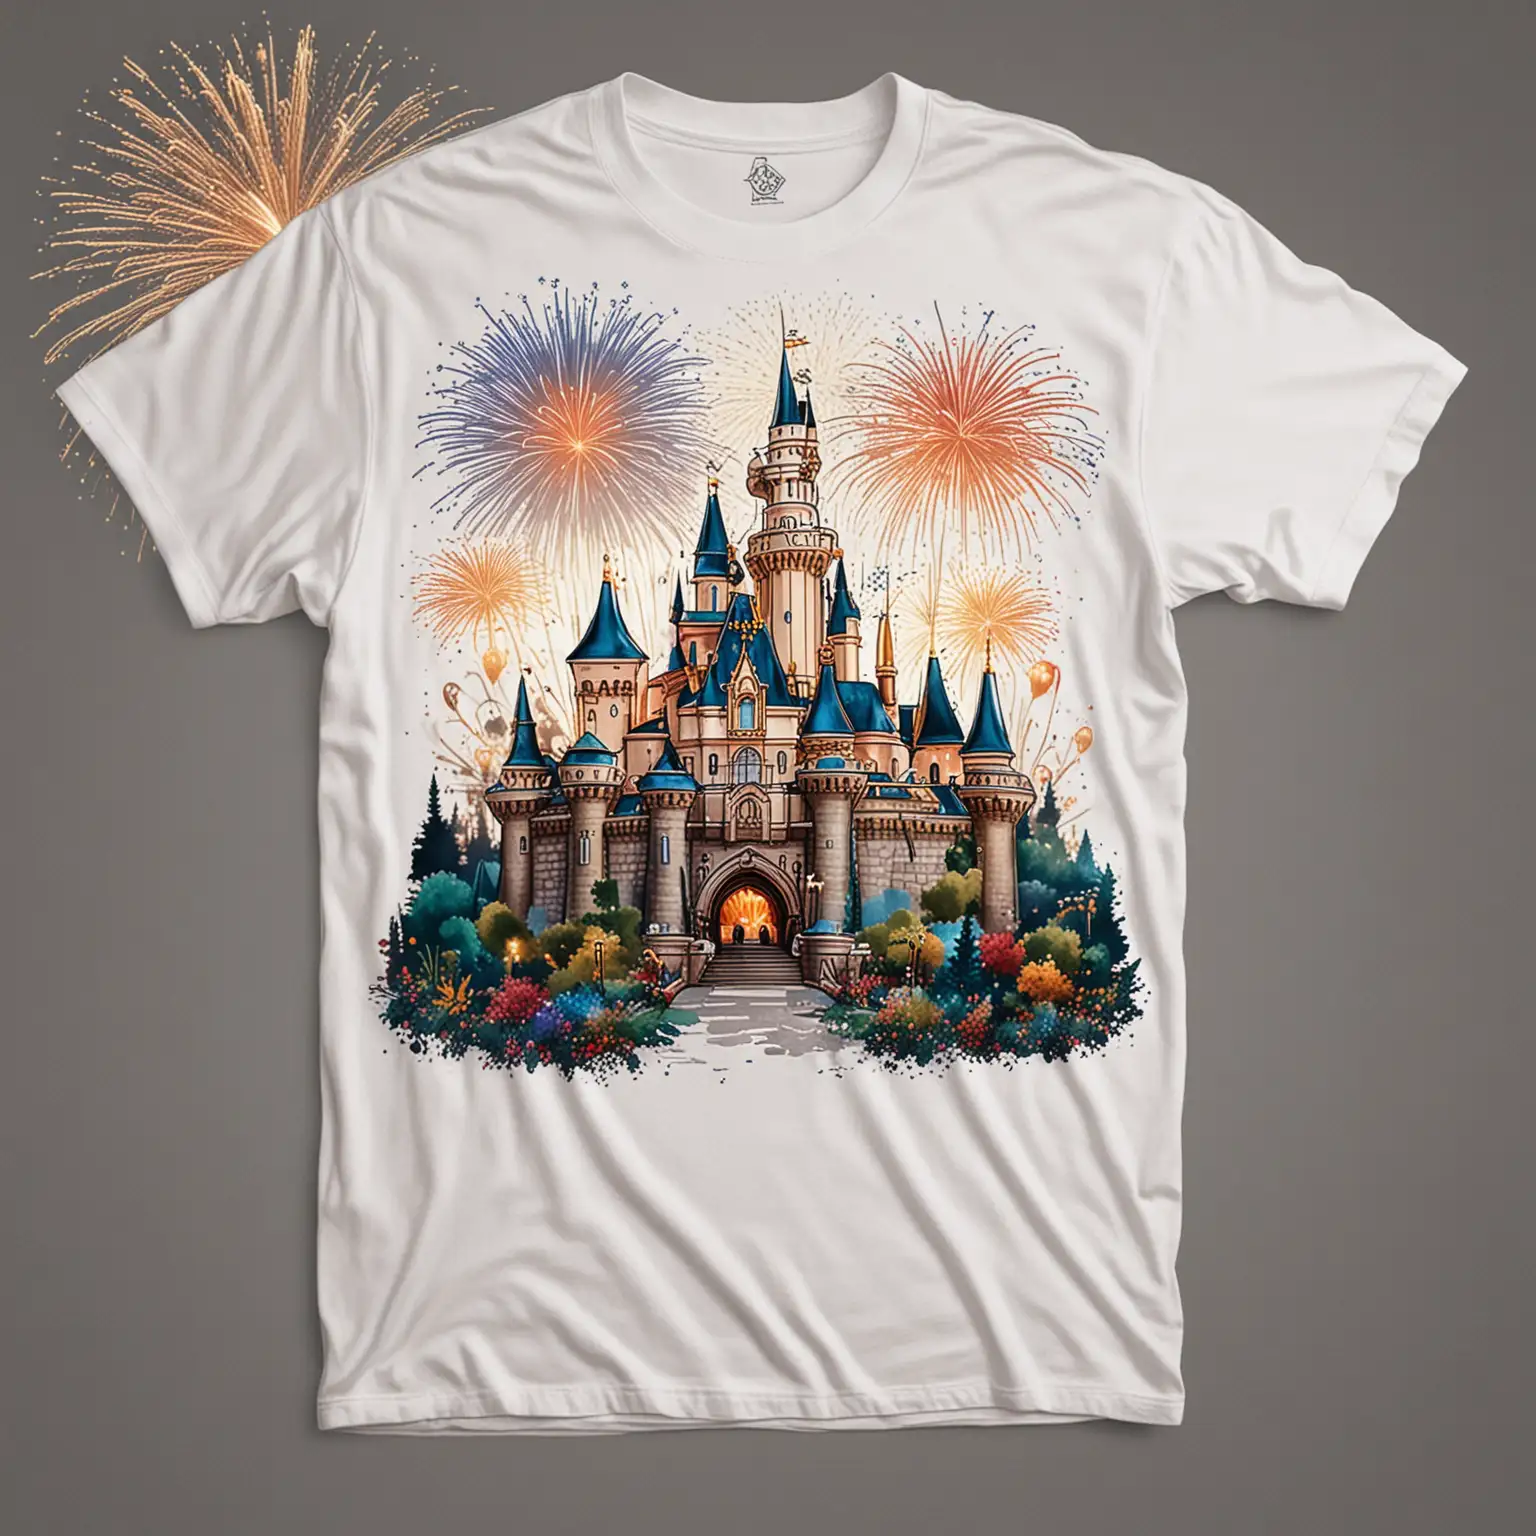 Disneyland Anaheim California Trip Celebration TShirt with Finely Detailed Castle and Fireworks